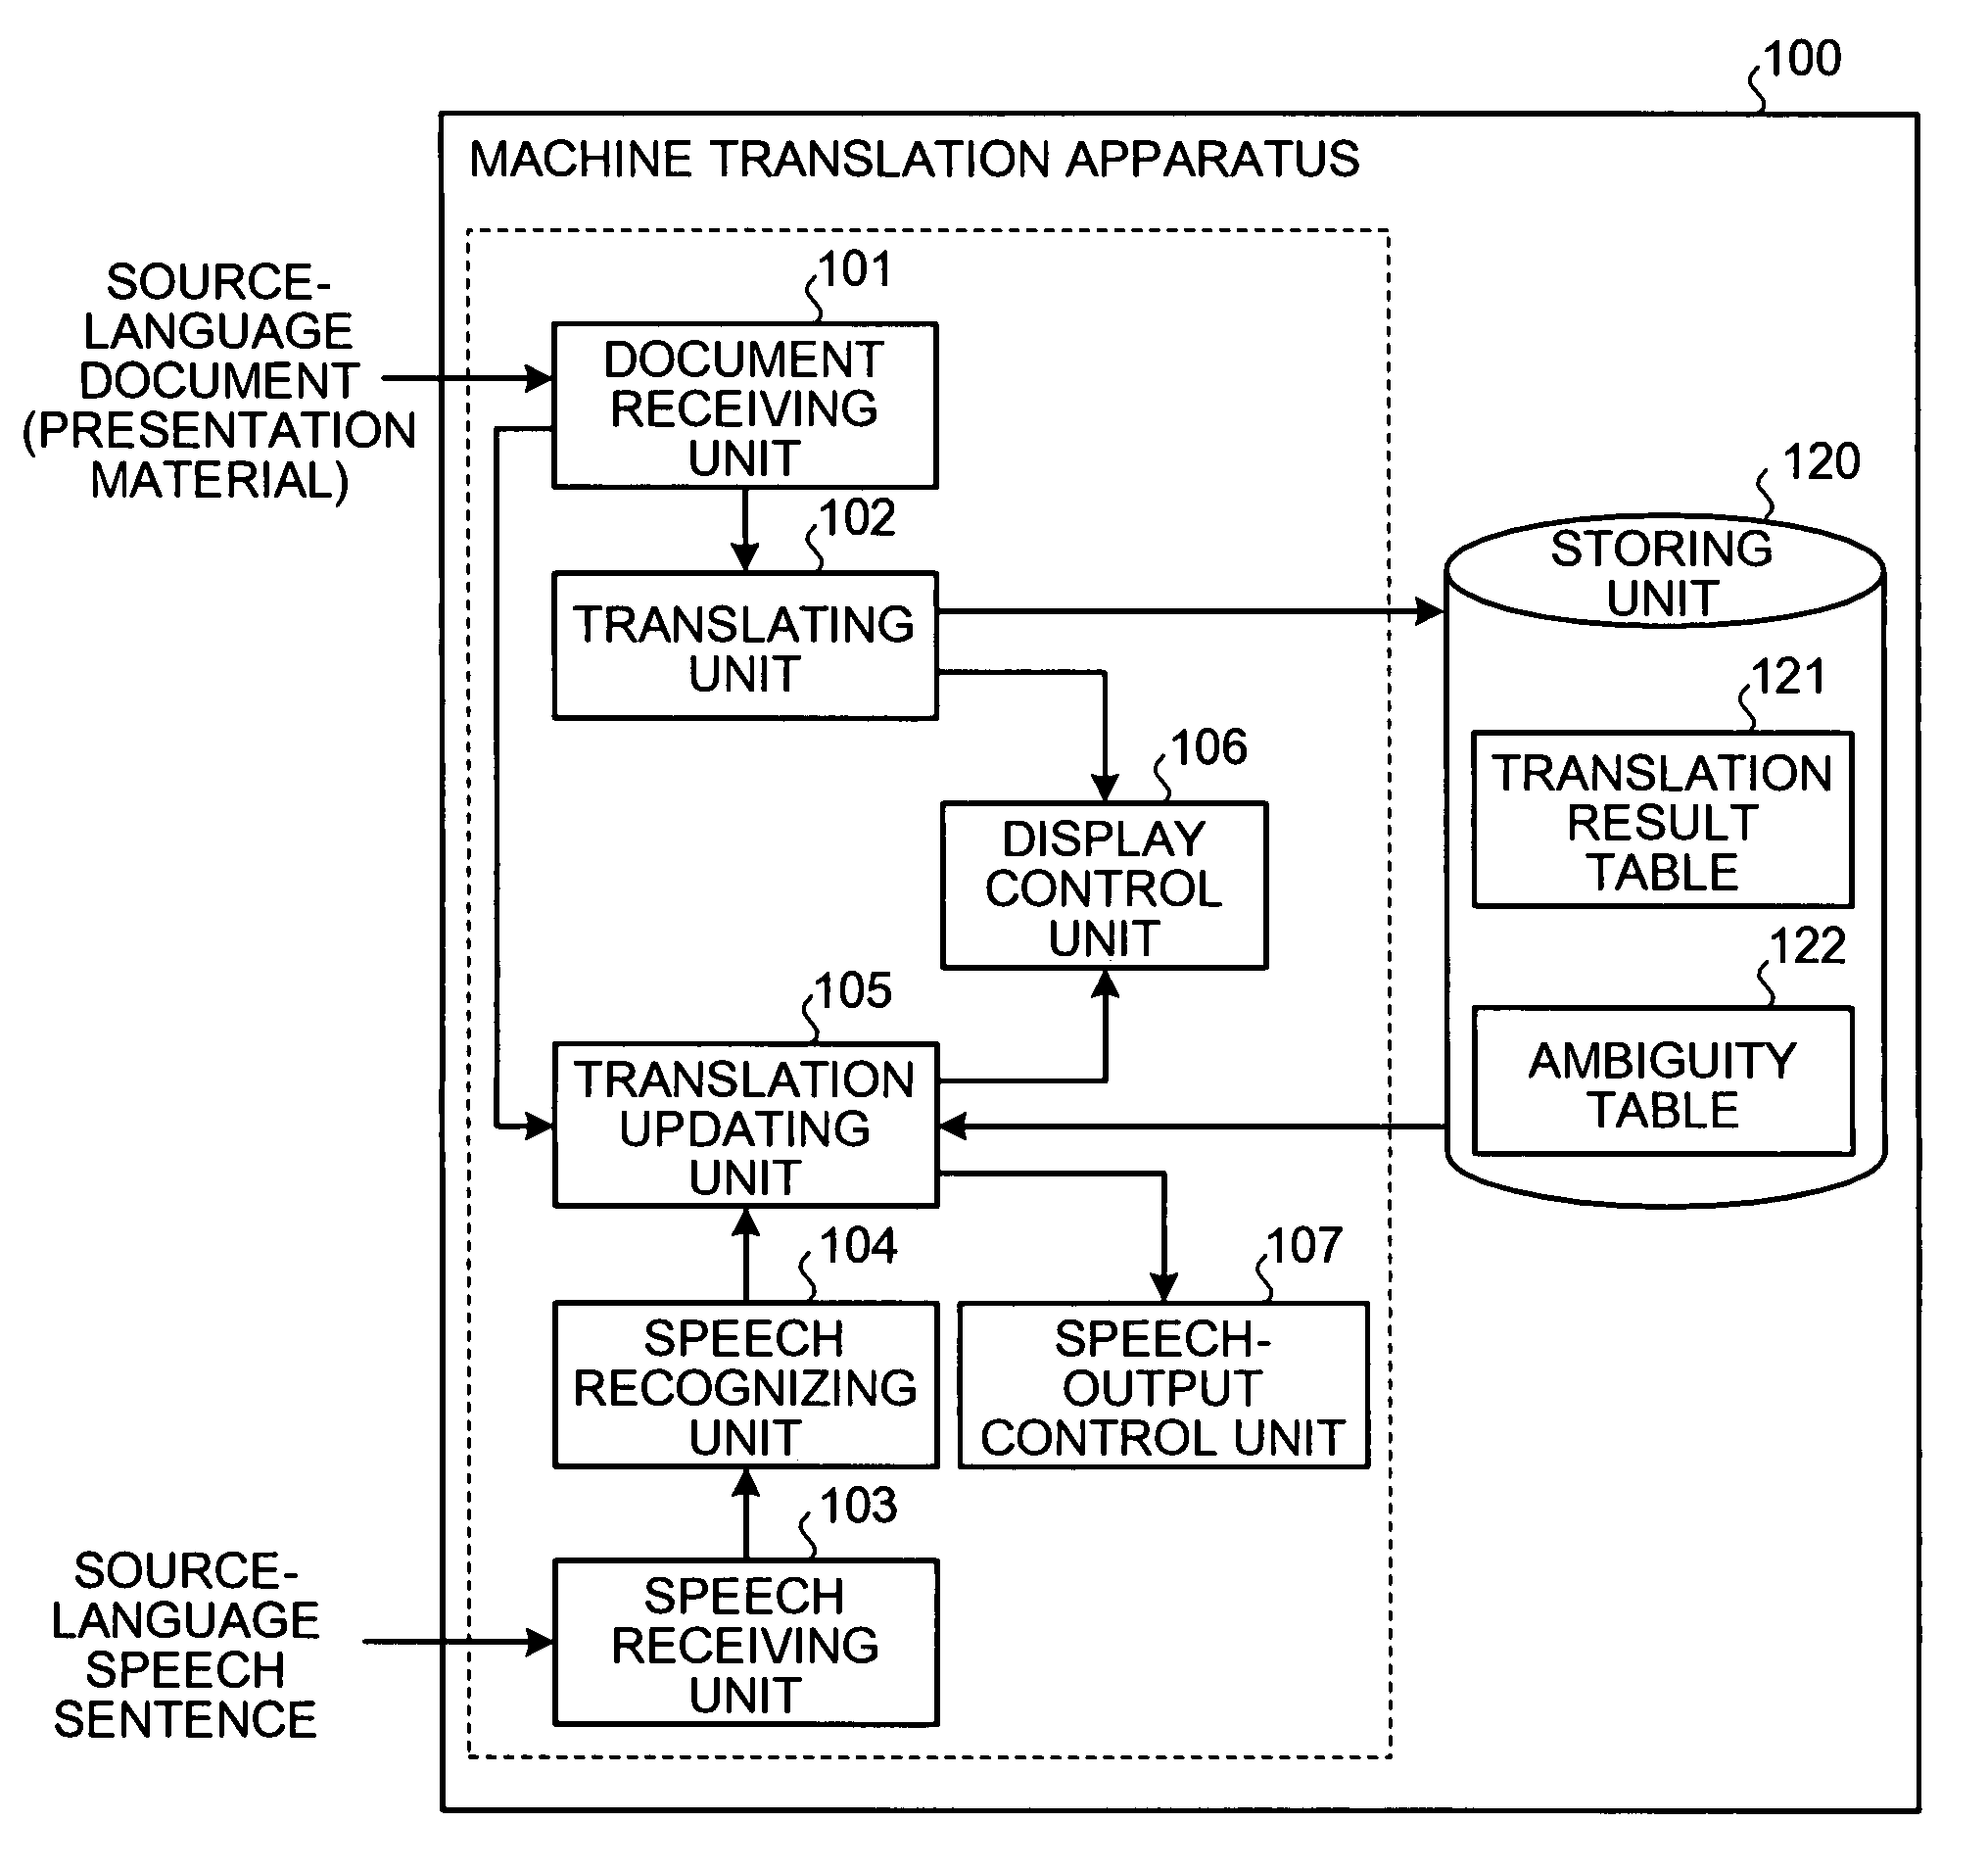 Apparatus, system, method, and computer program product for resolving ambiguities in translations